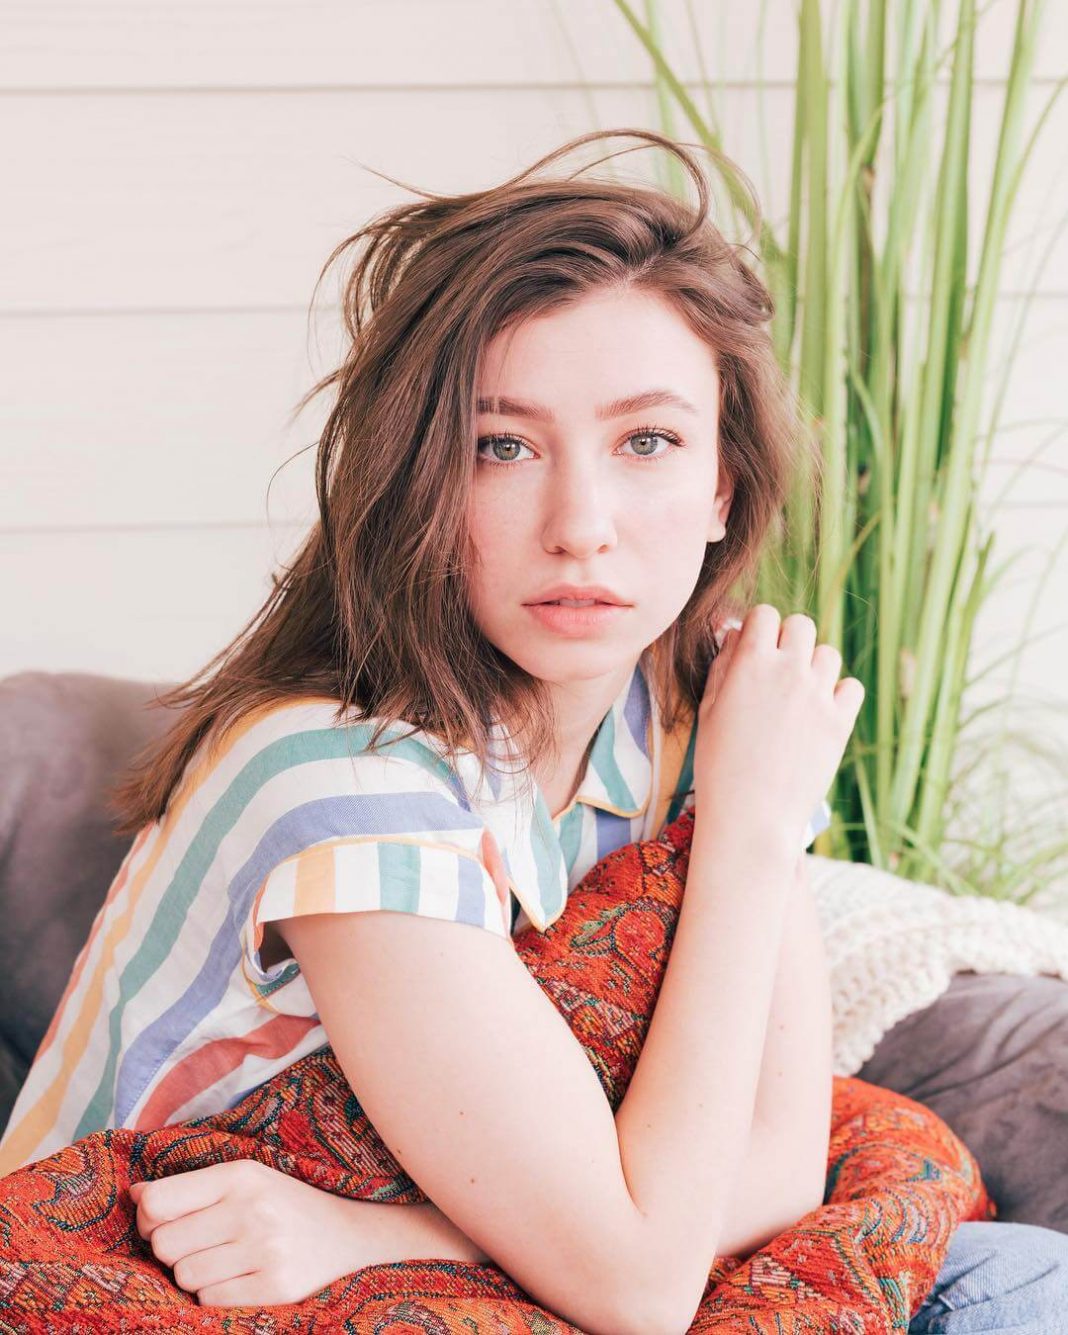 50 Katelyn Nacon Nude Pictures Which Prove Beauty Beyond Recognition 5